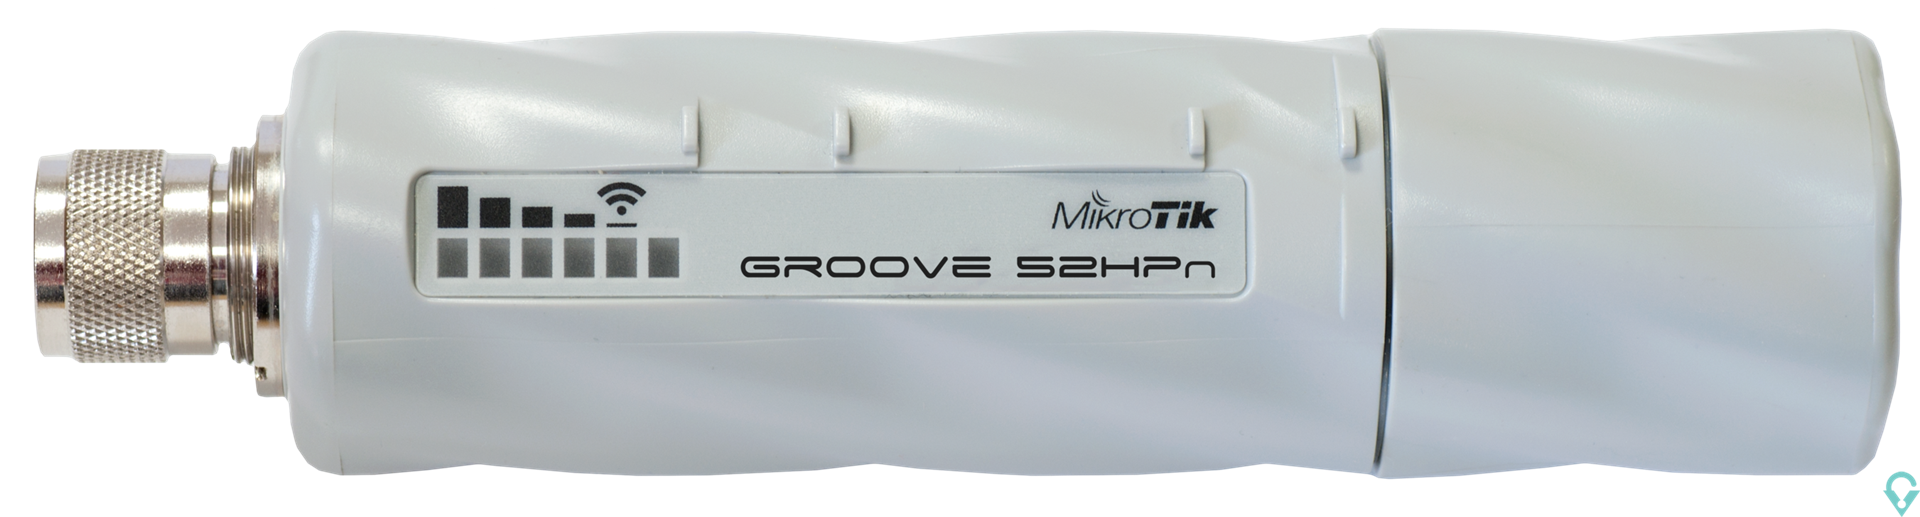 Picture of RBGroove52HPn Groove 52 with N-male connector, High Gain Single Chain 2.4GHz / 5GHz 802.11abgn wireless, 600MHz CPU, 64MB RAM, 1